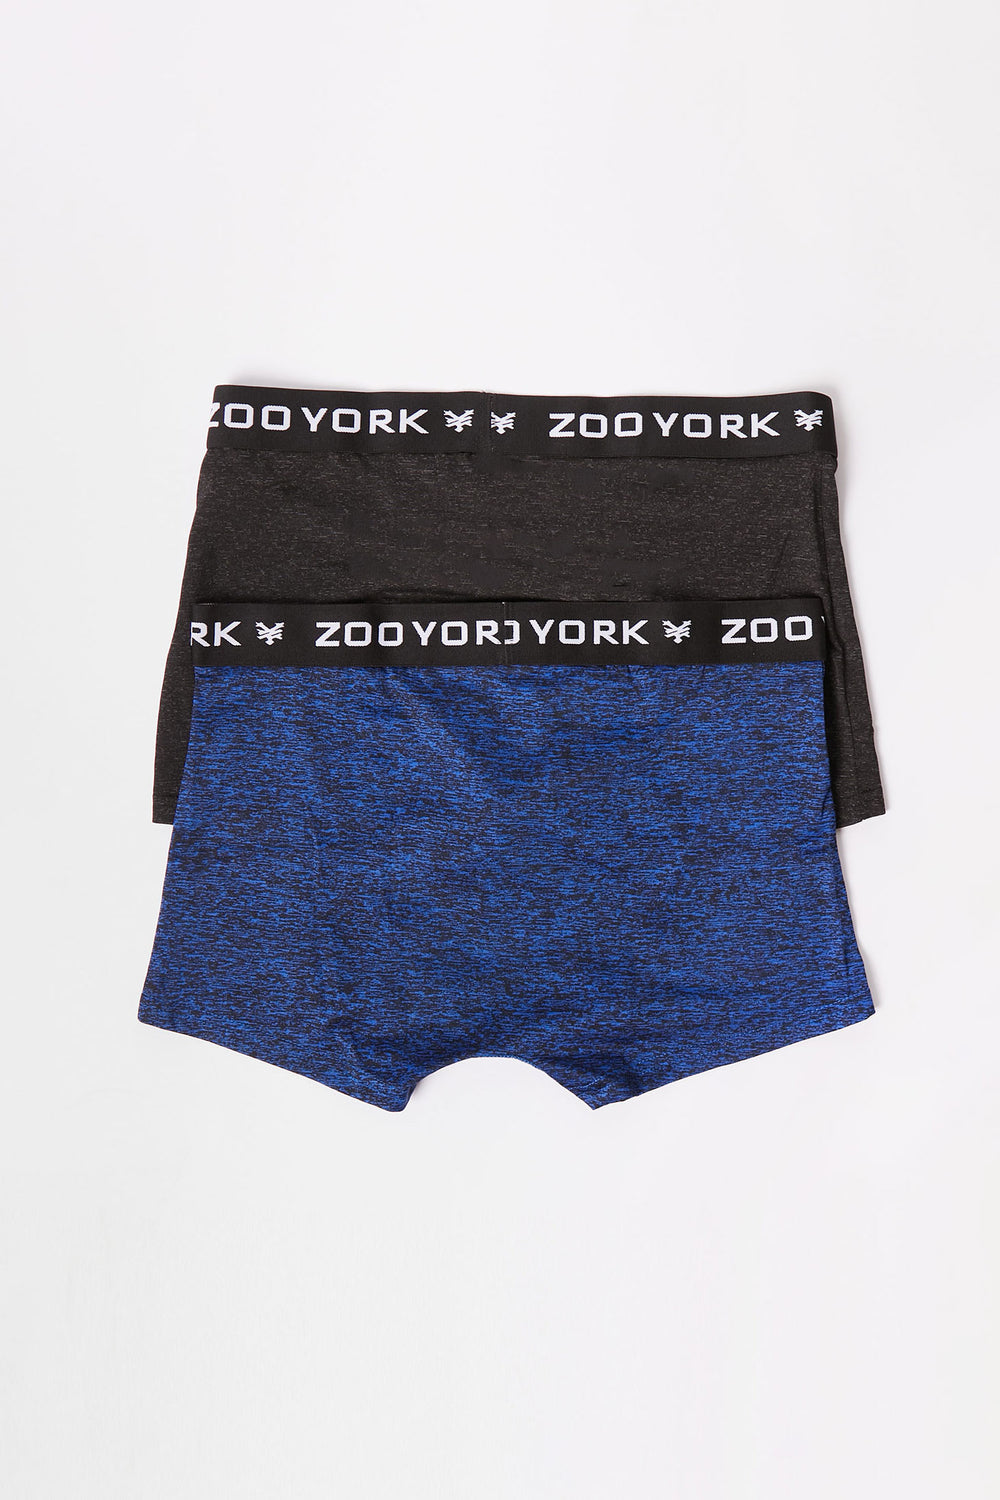 Zoo York Youth 2-Pack Space Dye Boxer Briefs Blue